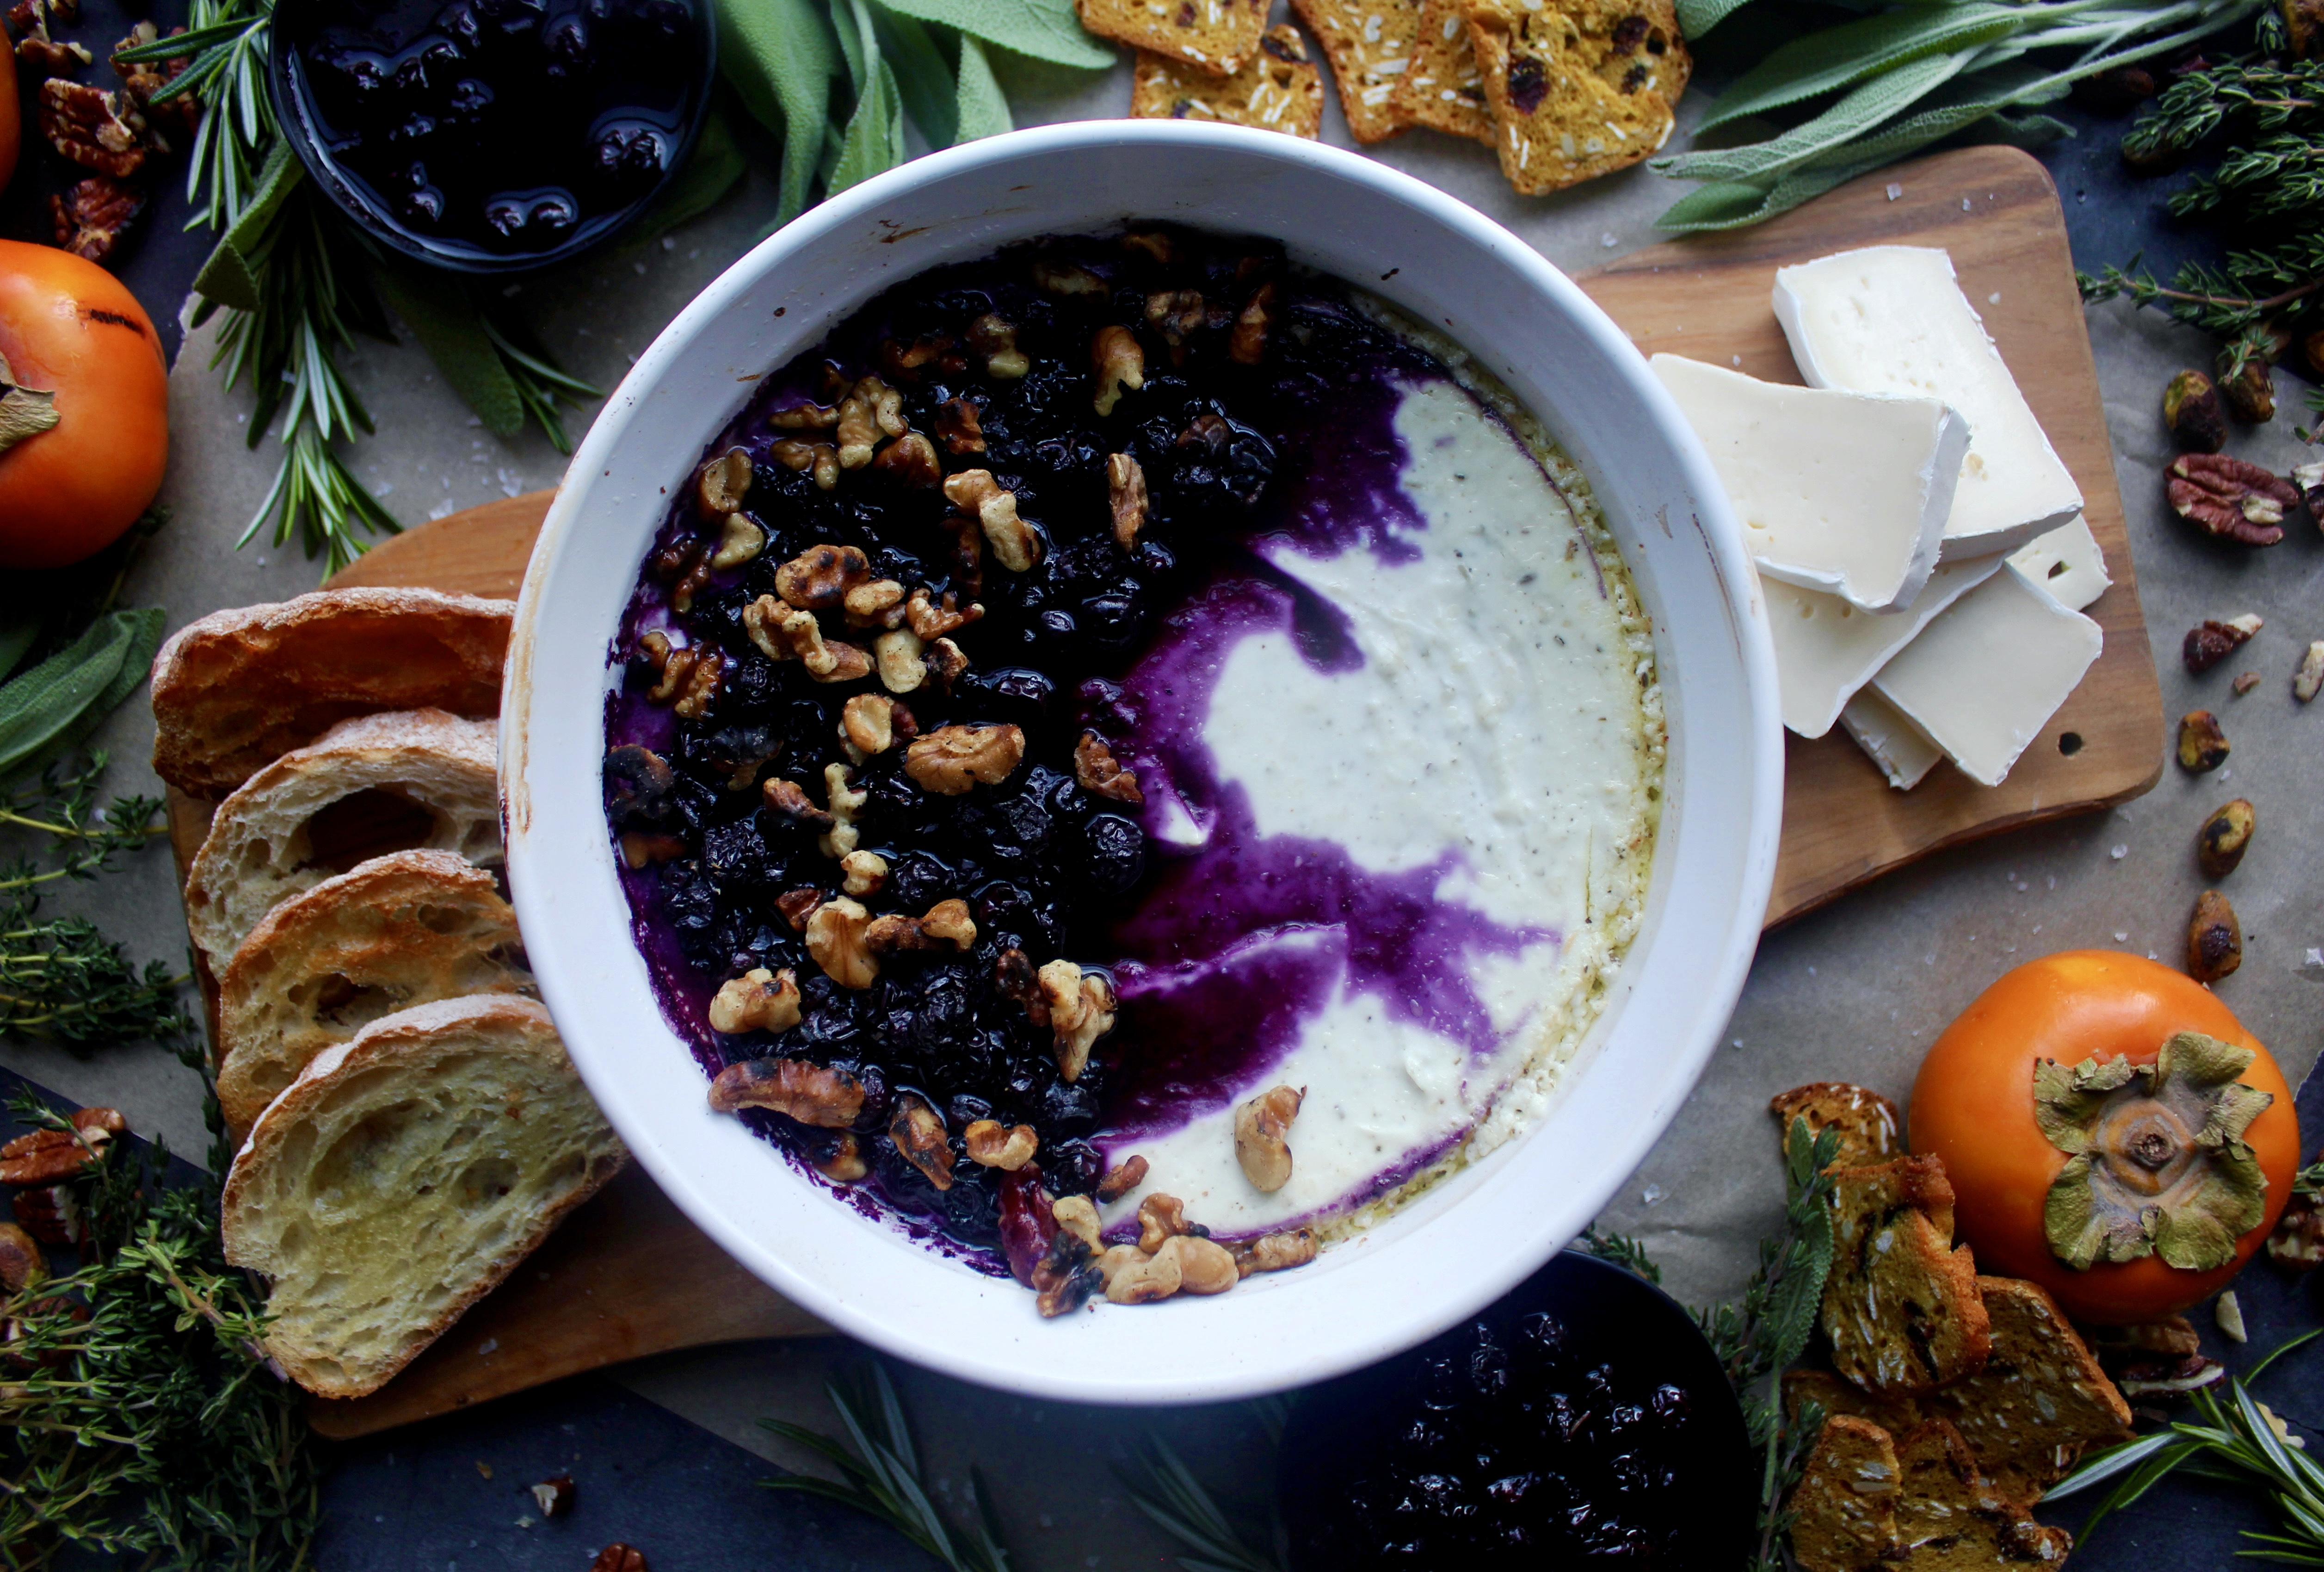 A creamy, tangy whipped three cheese base baked with jammy blueberries all topped off with toasty walnuts and a slice of crusty bread: this Baked Blueberry Walnut Goat Cheese Dip is the ultimate party appetizer!